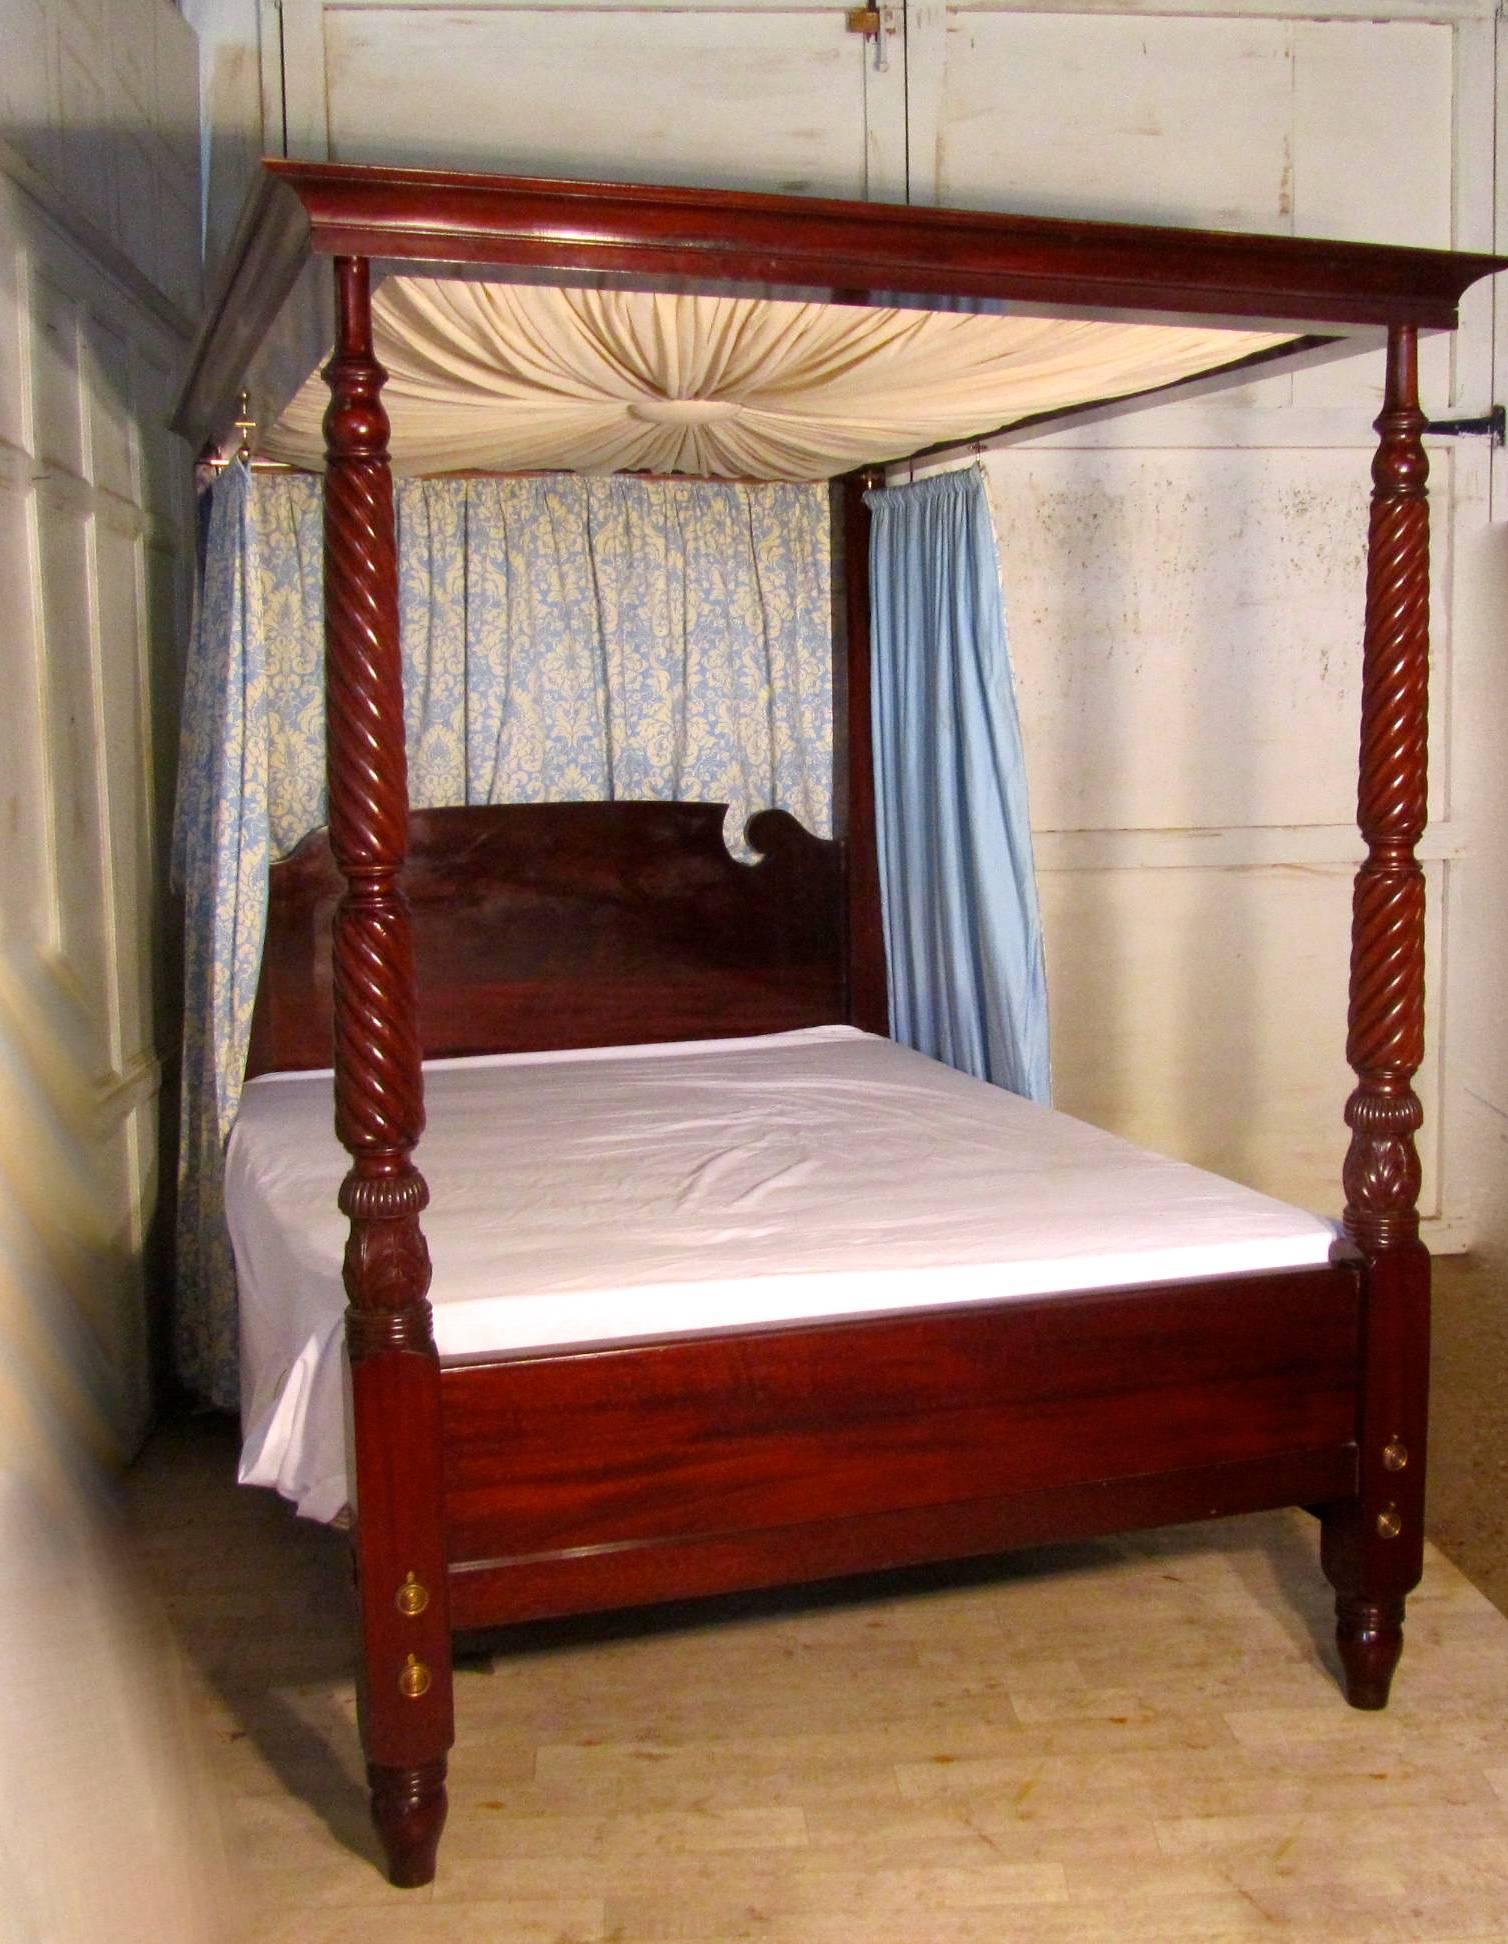 This a wonderful large Victorian mahogany four-poster bed, it has a fabric sun burst canopy, bordered with an outward sweeping cornice. The bed posts are turned mahogany with an elegant twist and carving, the polished mahogany head board has swan